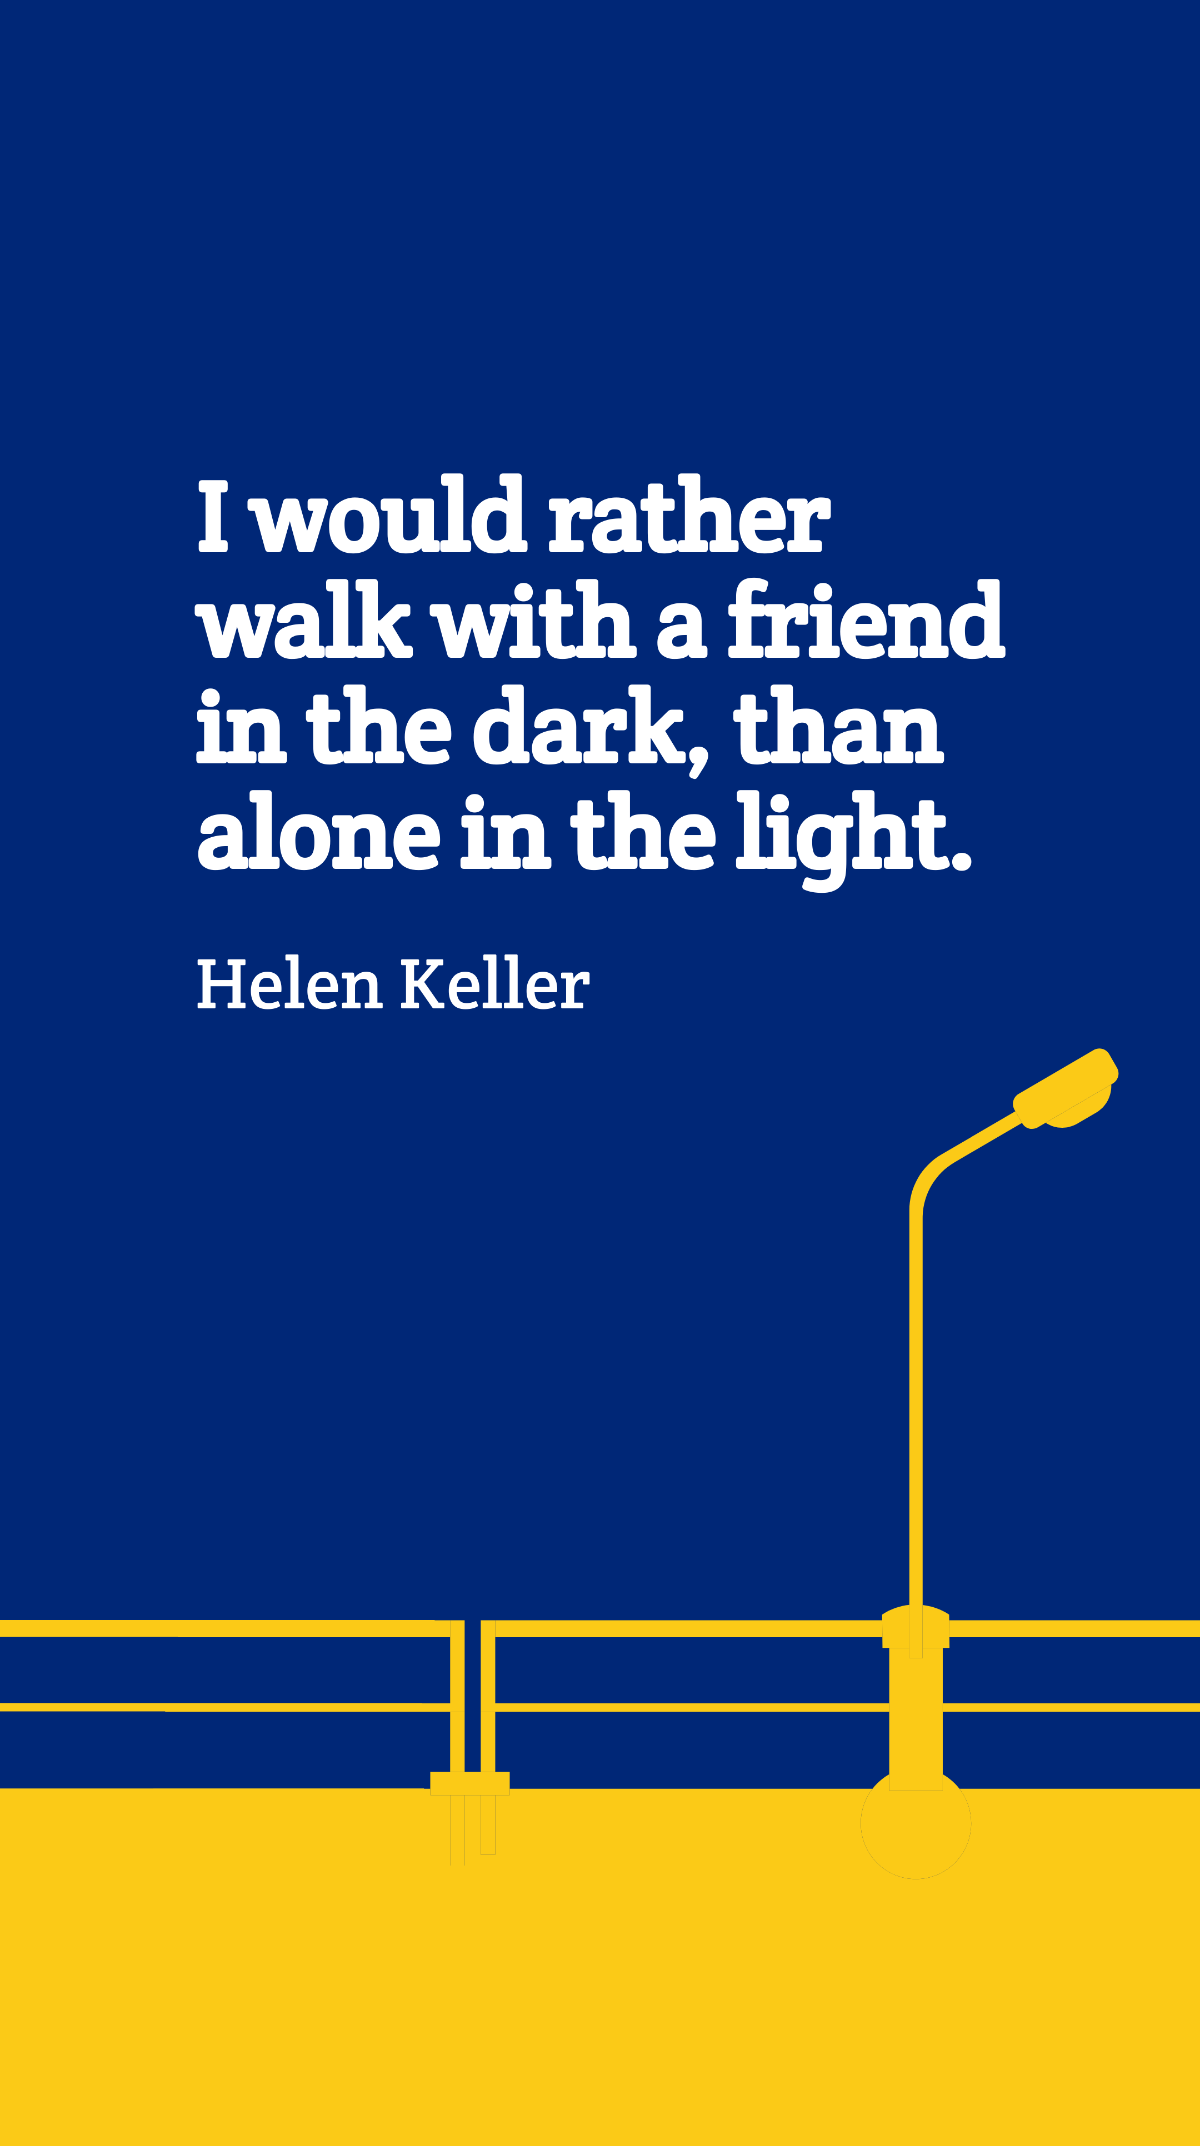 Helen Keller - I would rather walk with a friend in the dark, than alone in the light. Template